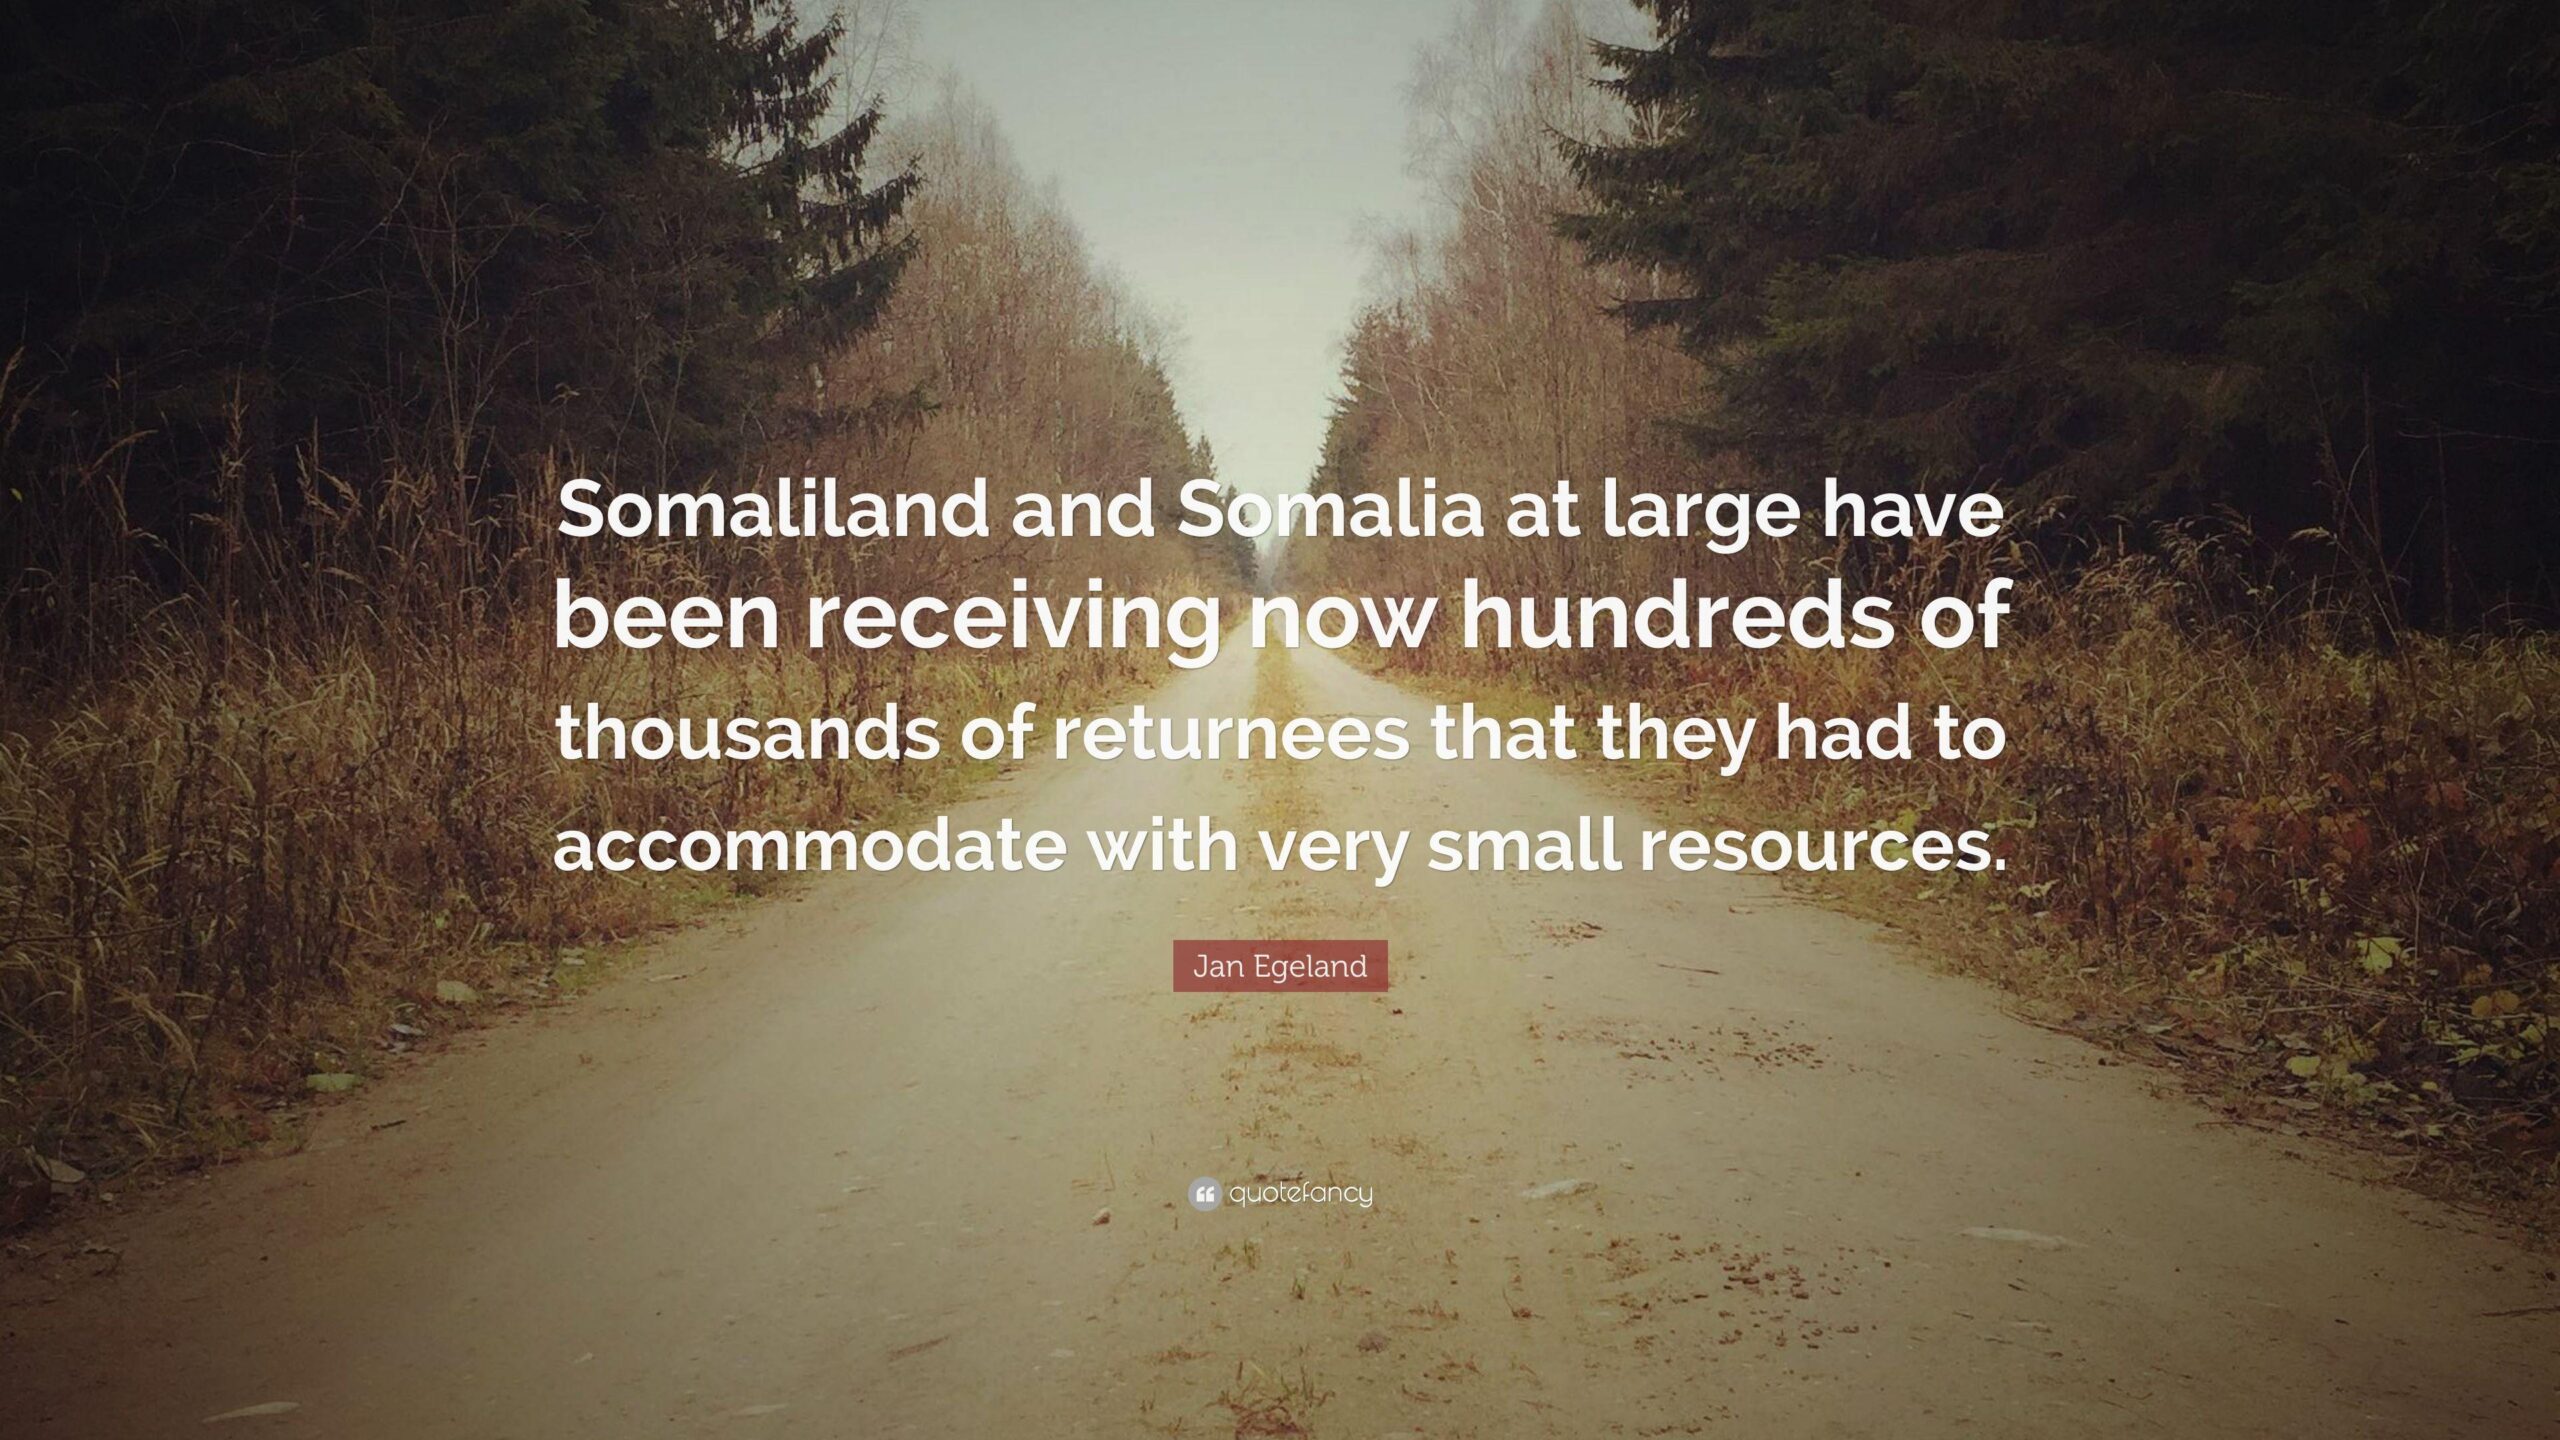 Jan Egeland Quote “Somaliland and Somalia at large have been